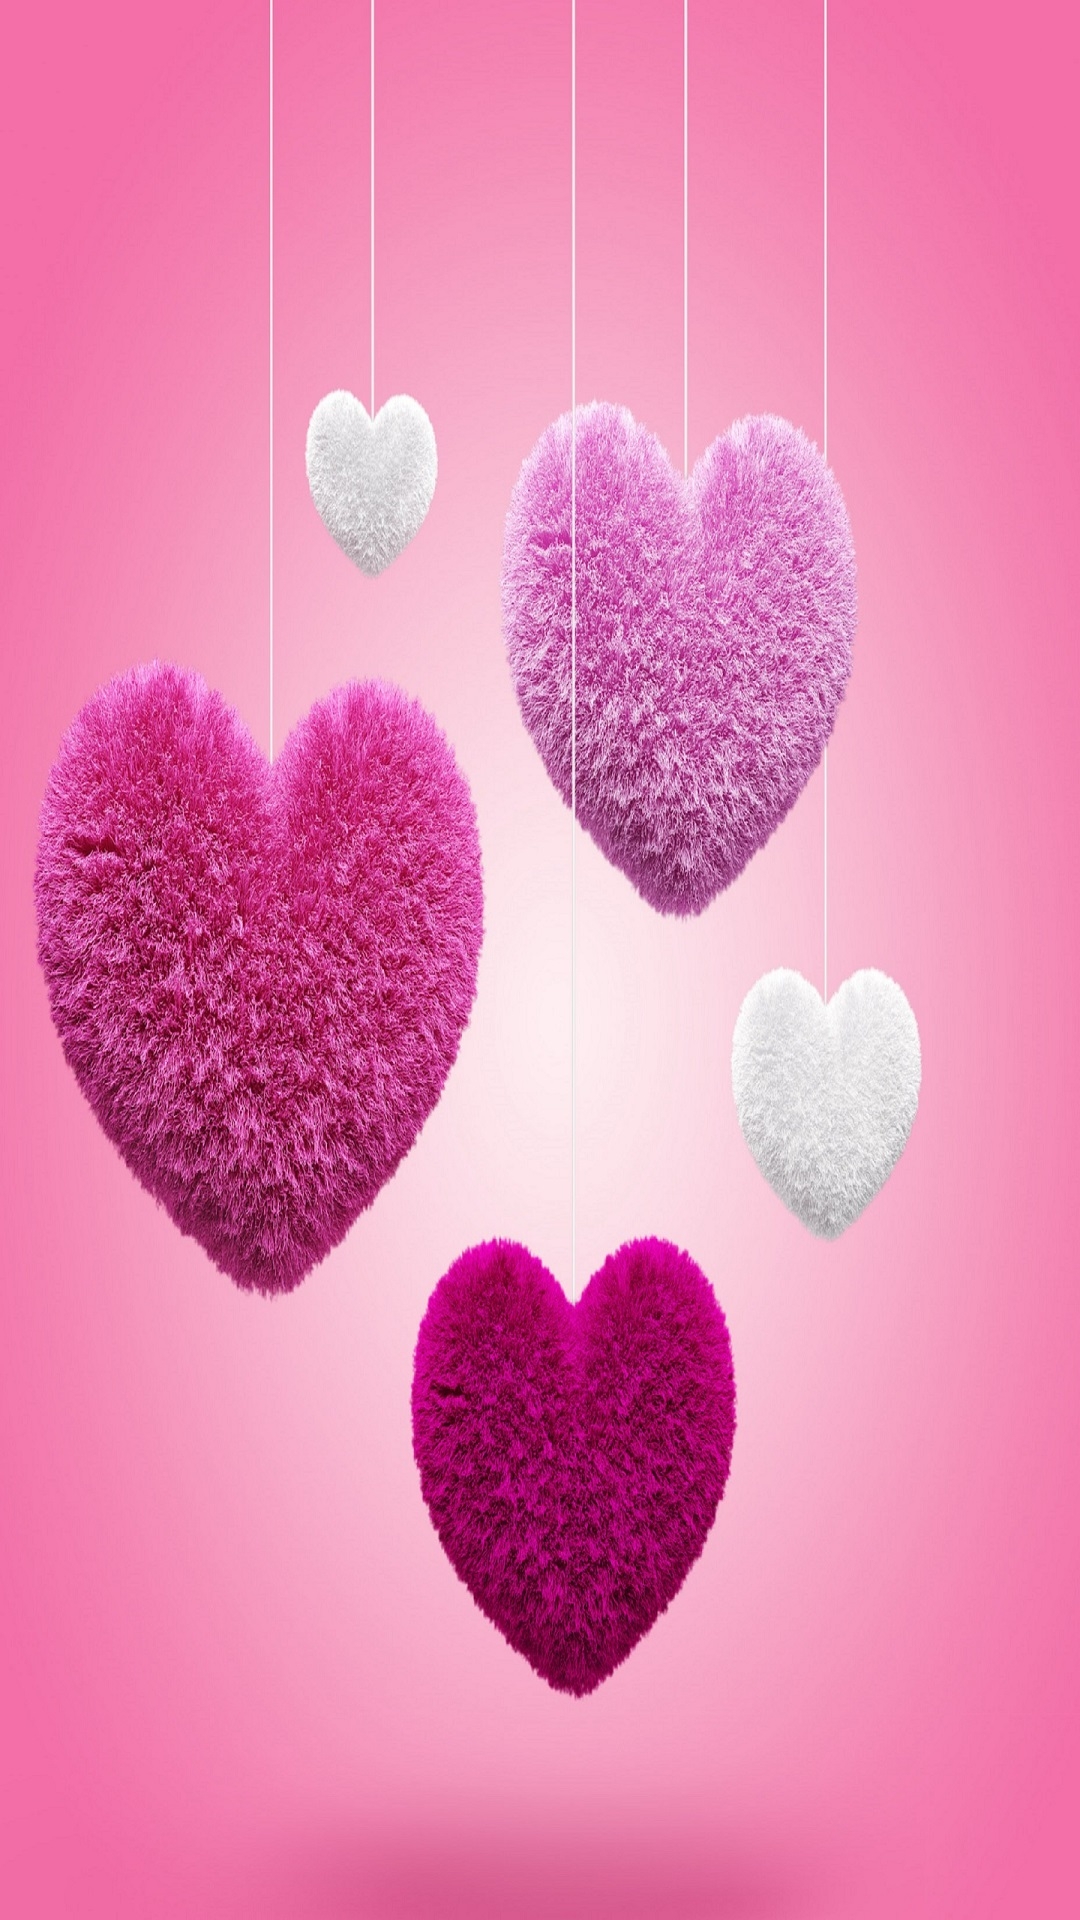 Fluffy Hearts for Apple iPhone 6S & 7 Plus resolution